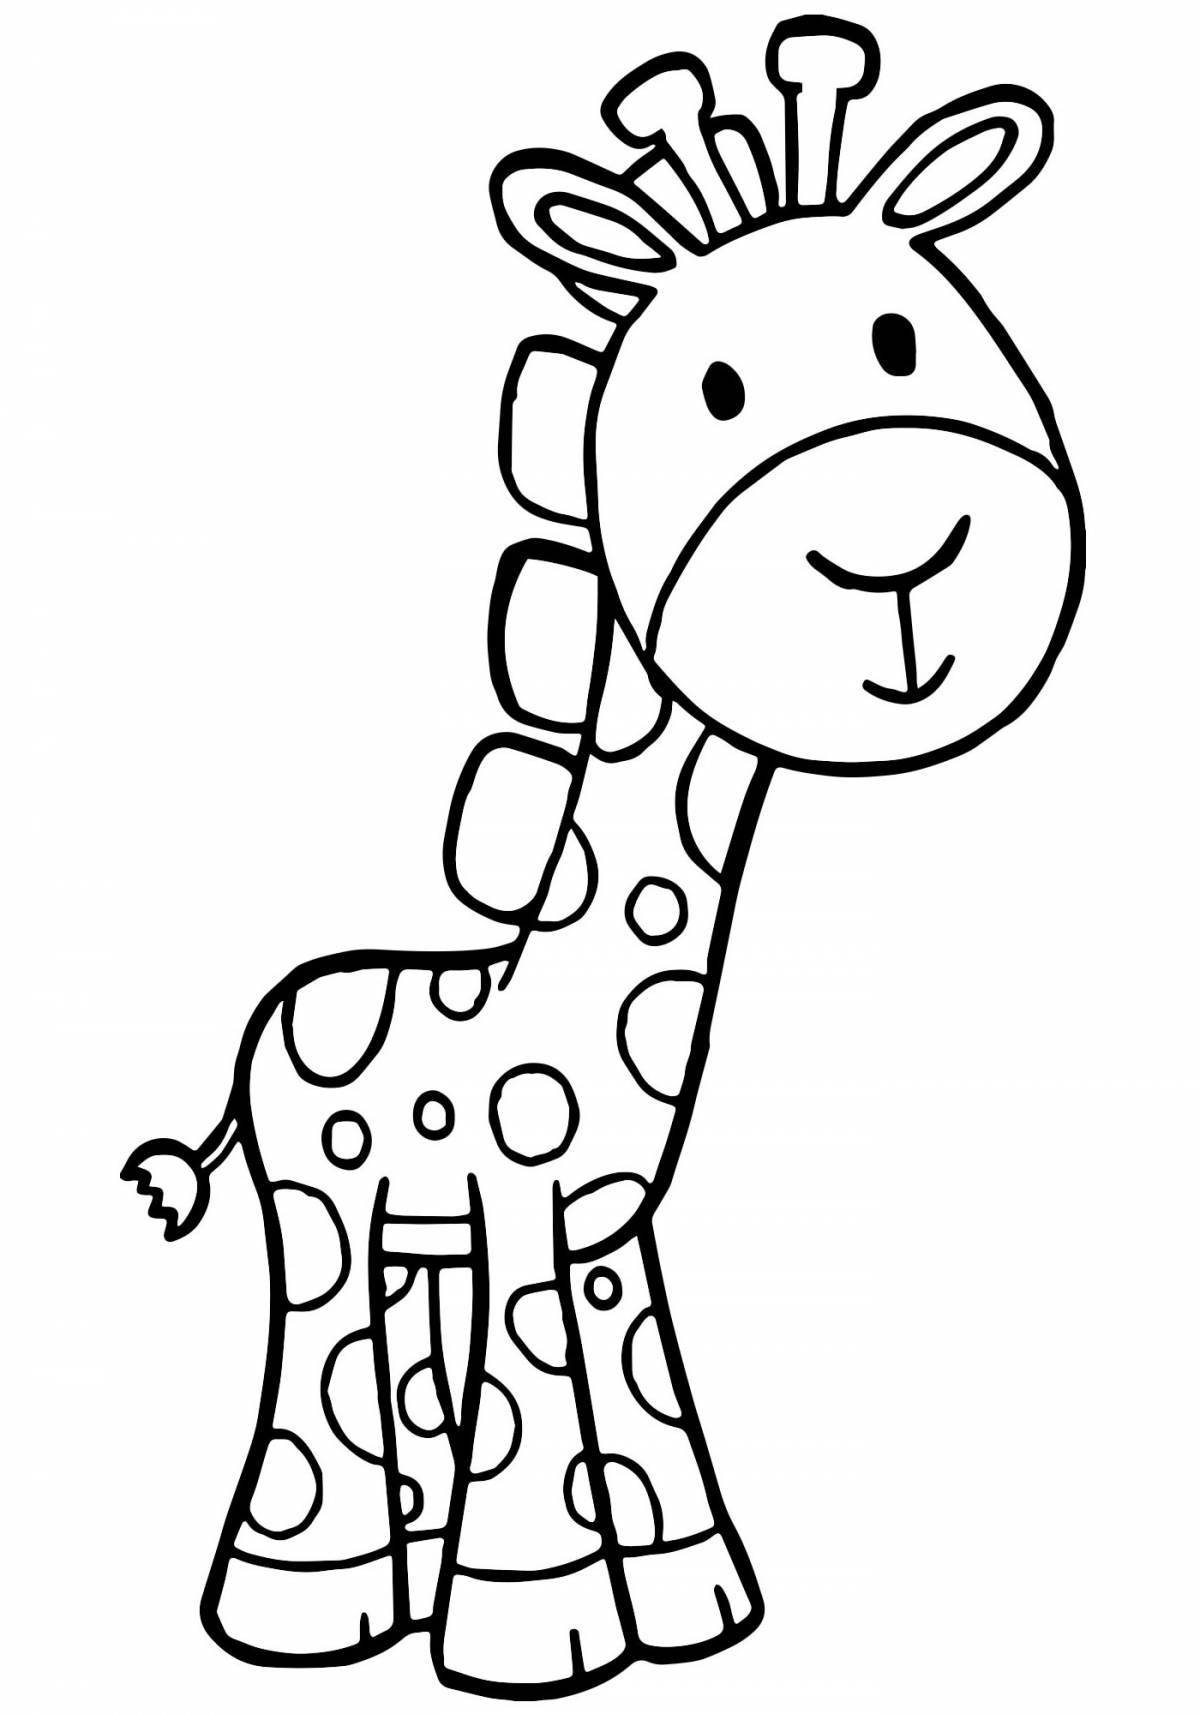 Exciting giraffe coloring book for preschoolers